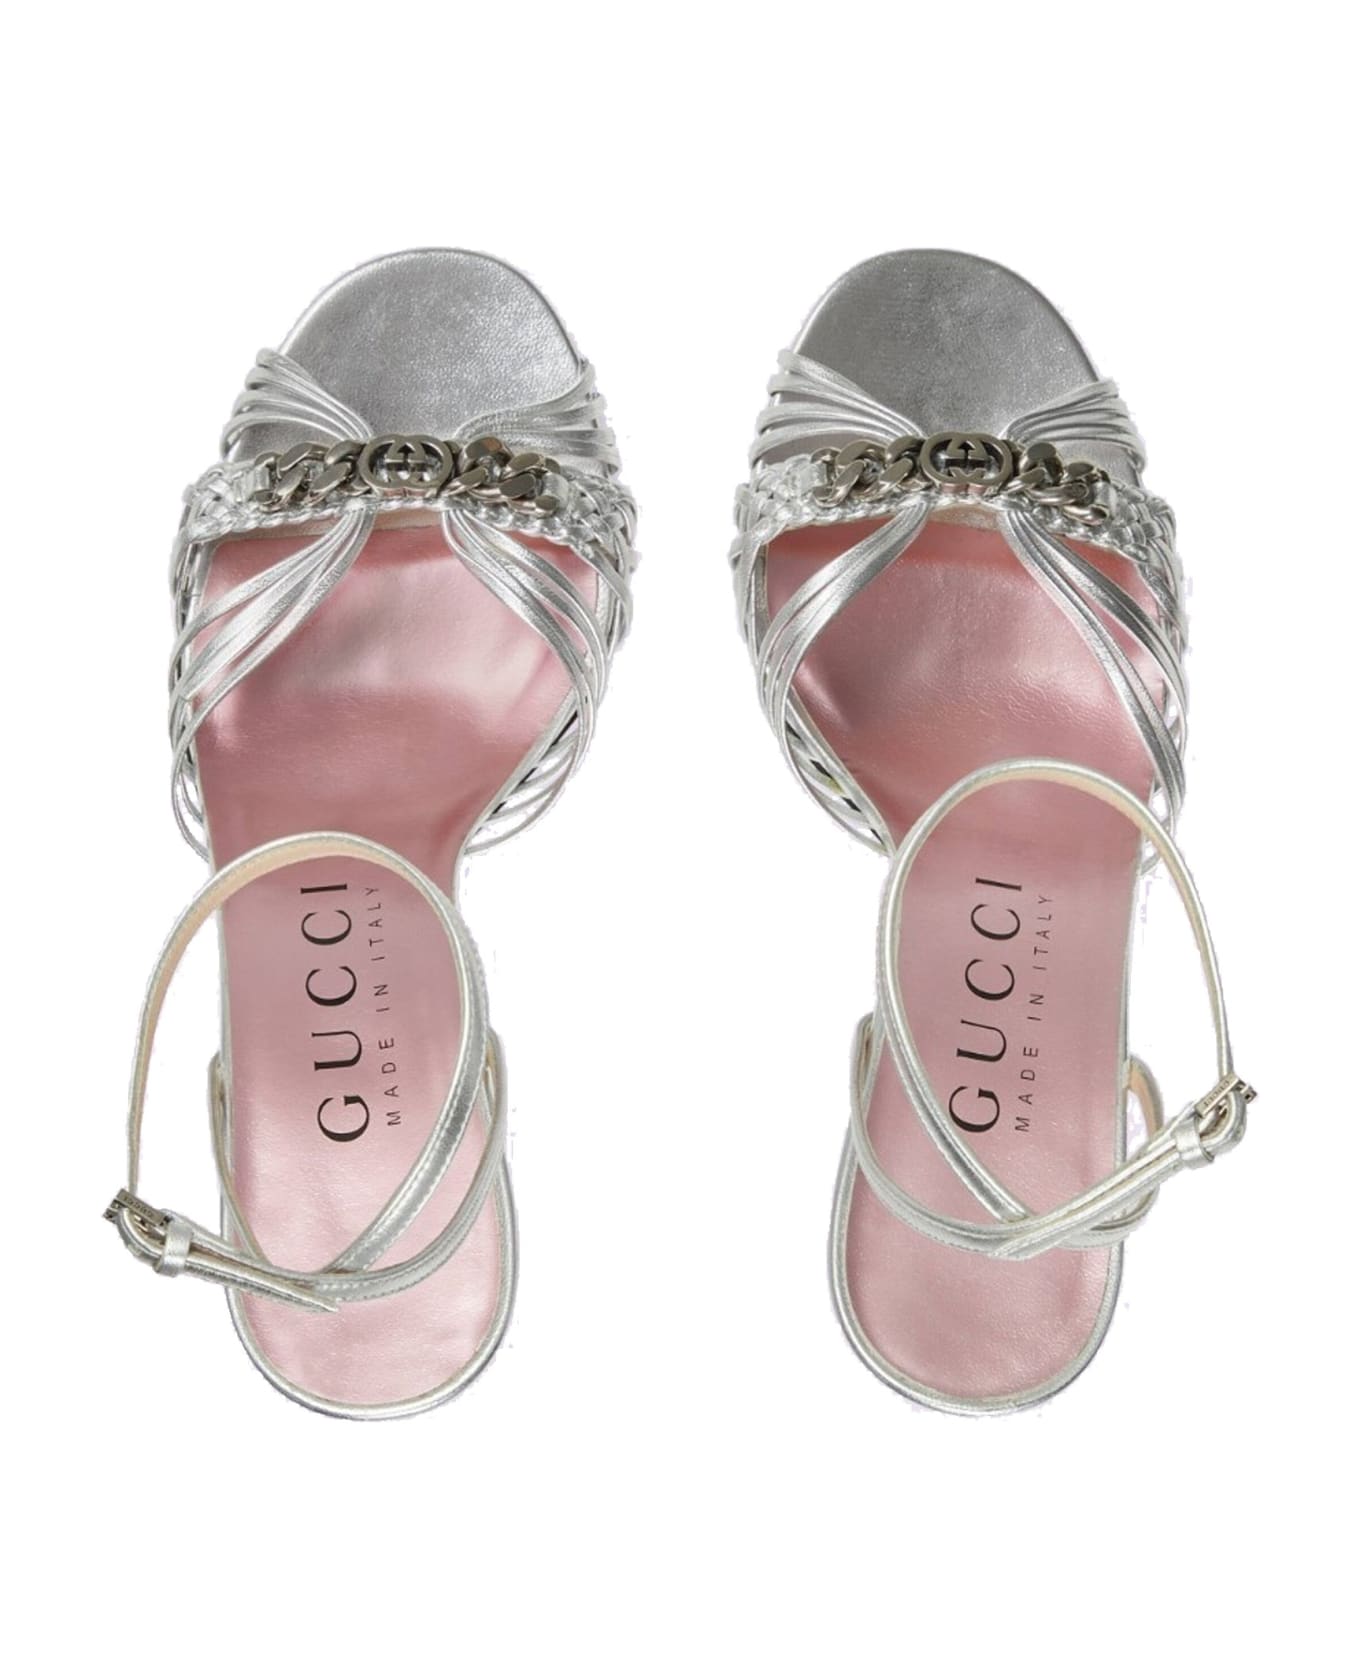 Gucci Leather Sandals - Silver